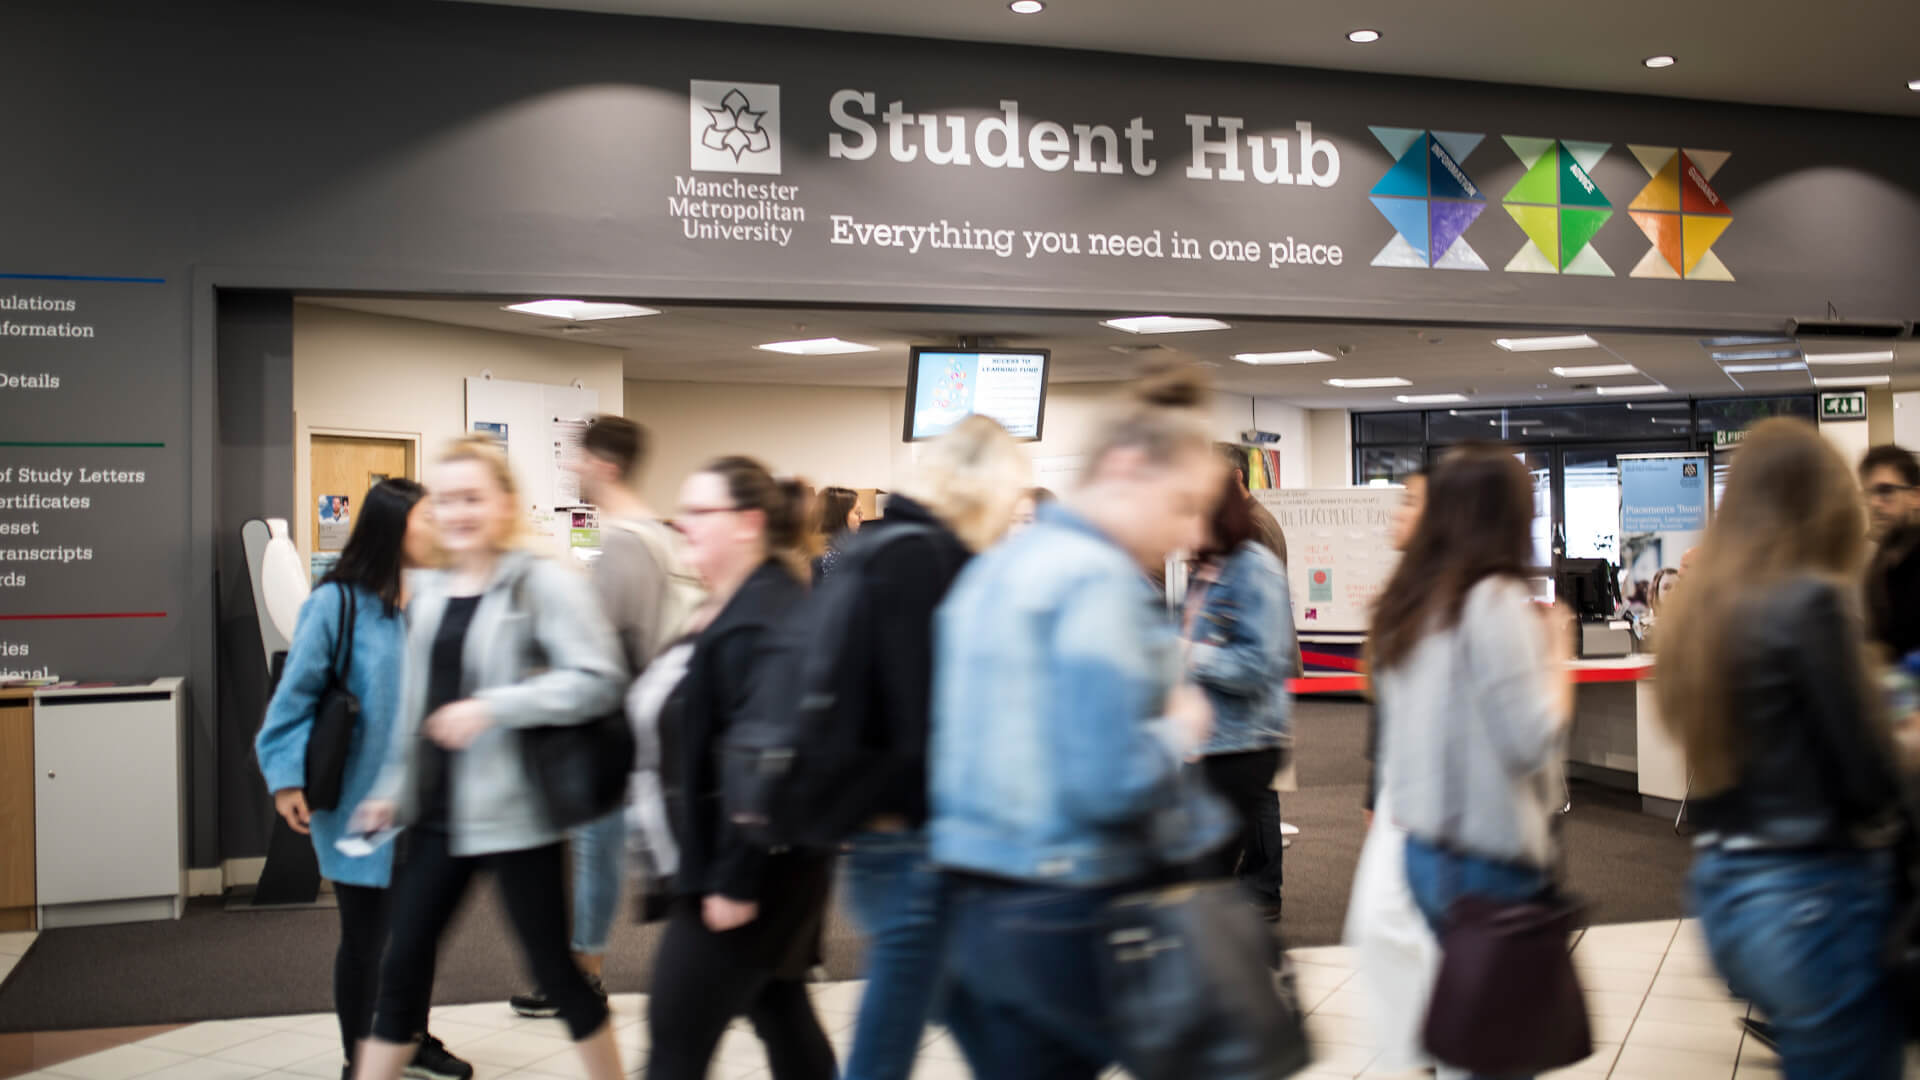 Manchester Metropolitan University's Student Hub offers advice to students on campus